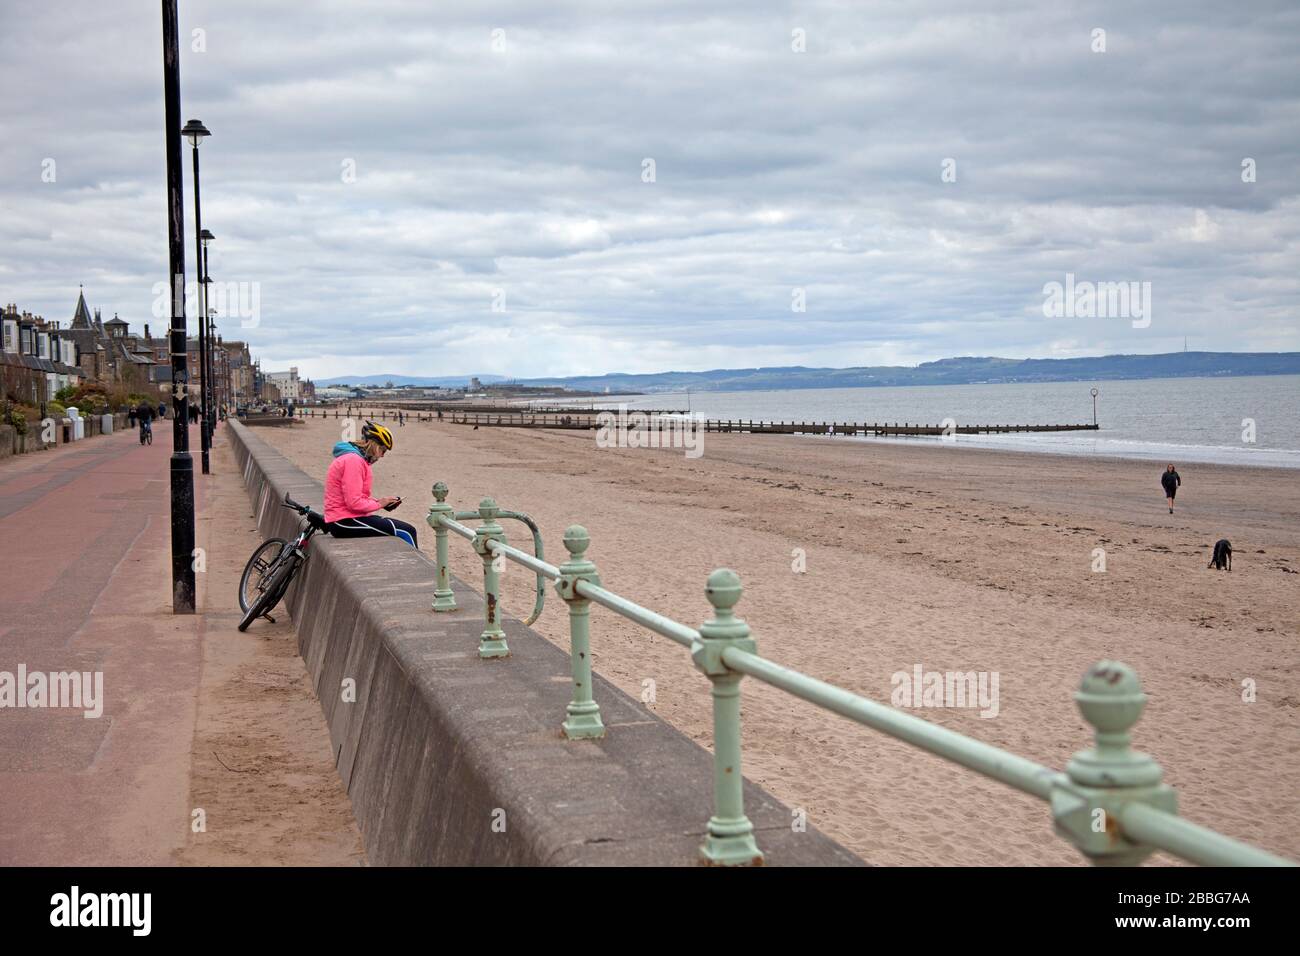 Portobello, Edinburgh, Scotland, UK. 31st Mar 2020. Cloudy and quiet on the promenade and beach rather than the crowds that normally frequent on an afternoon, with possibly around 200 people the length of the beach. More like winter time than spring time with Amusement arcades and coffe stalls closed together with the Children's Playpark taped off forbidding anyone from entering due to the Coronavirus threat. Stock Photo